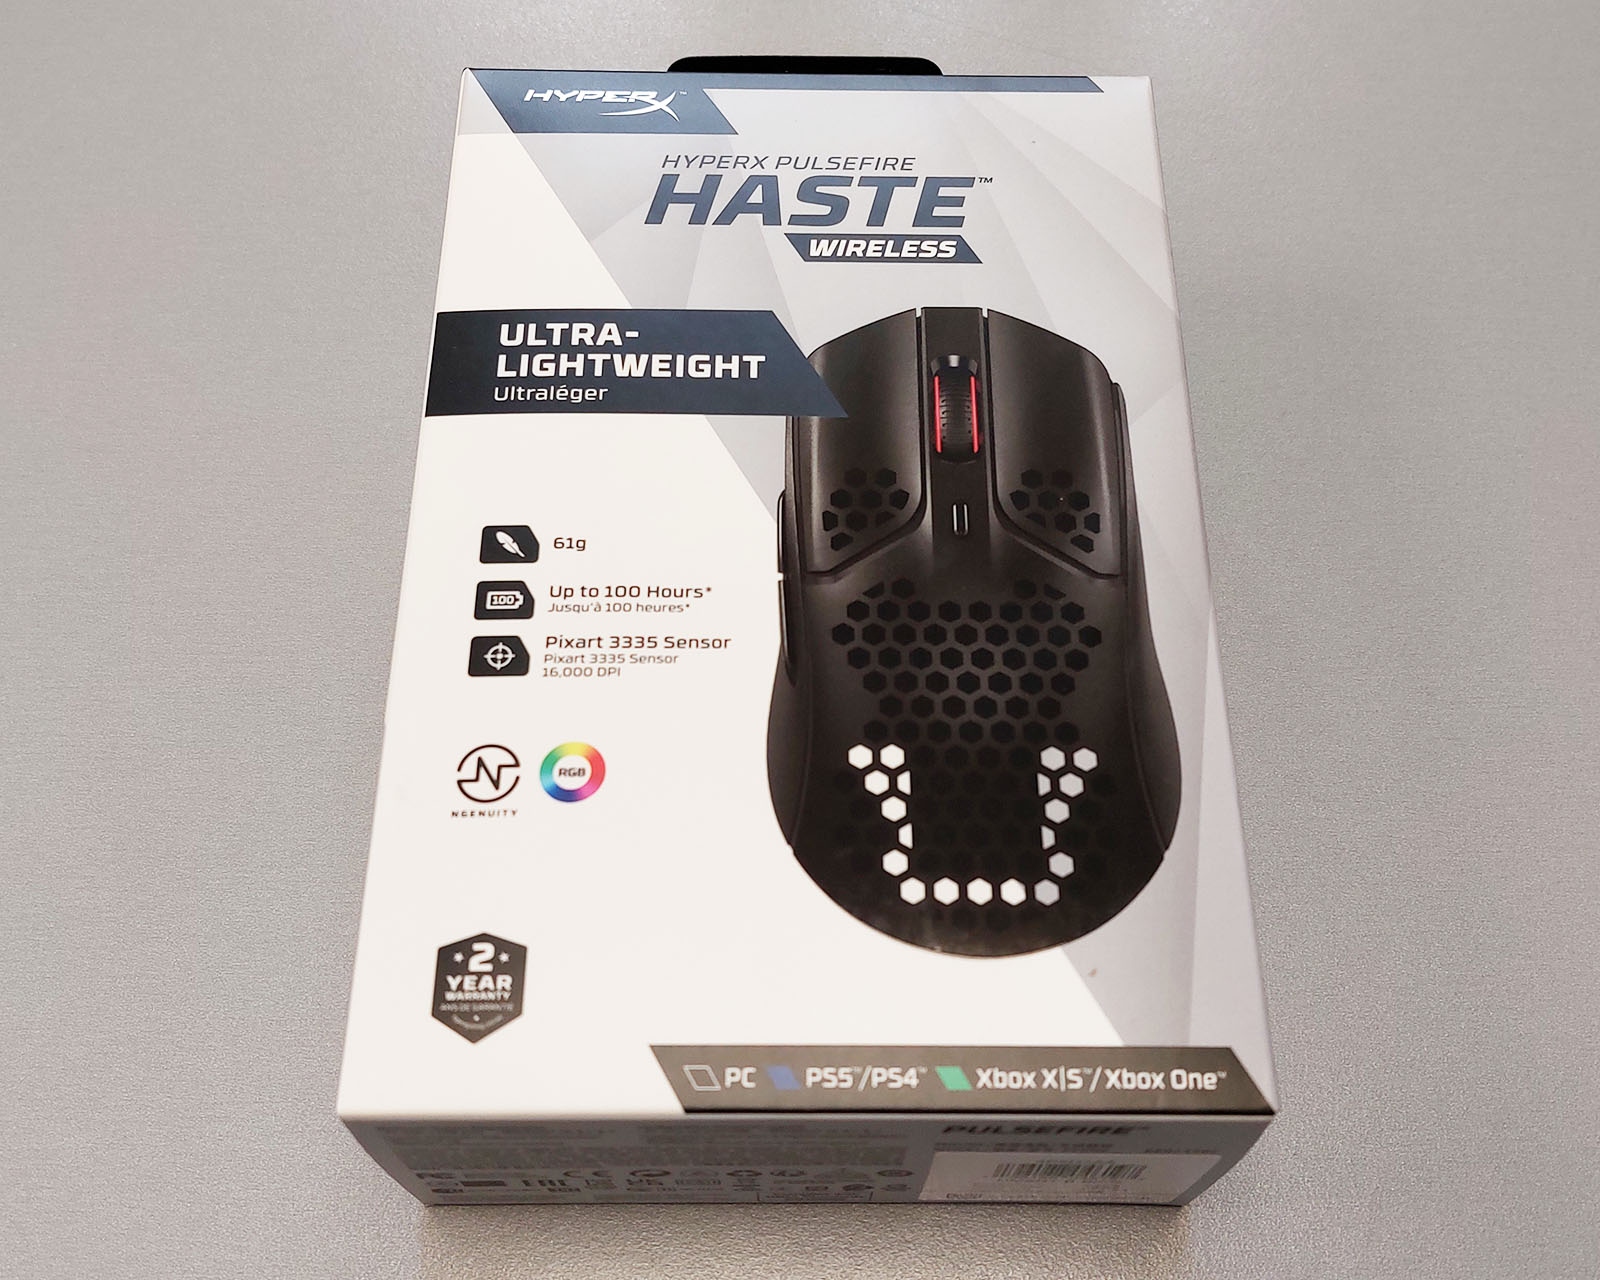 HyperX Pulsefire Haste Wireless Gaming Mouse Review